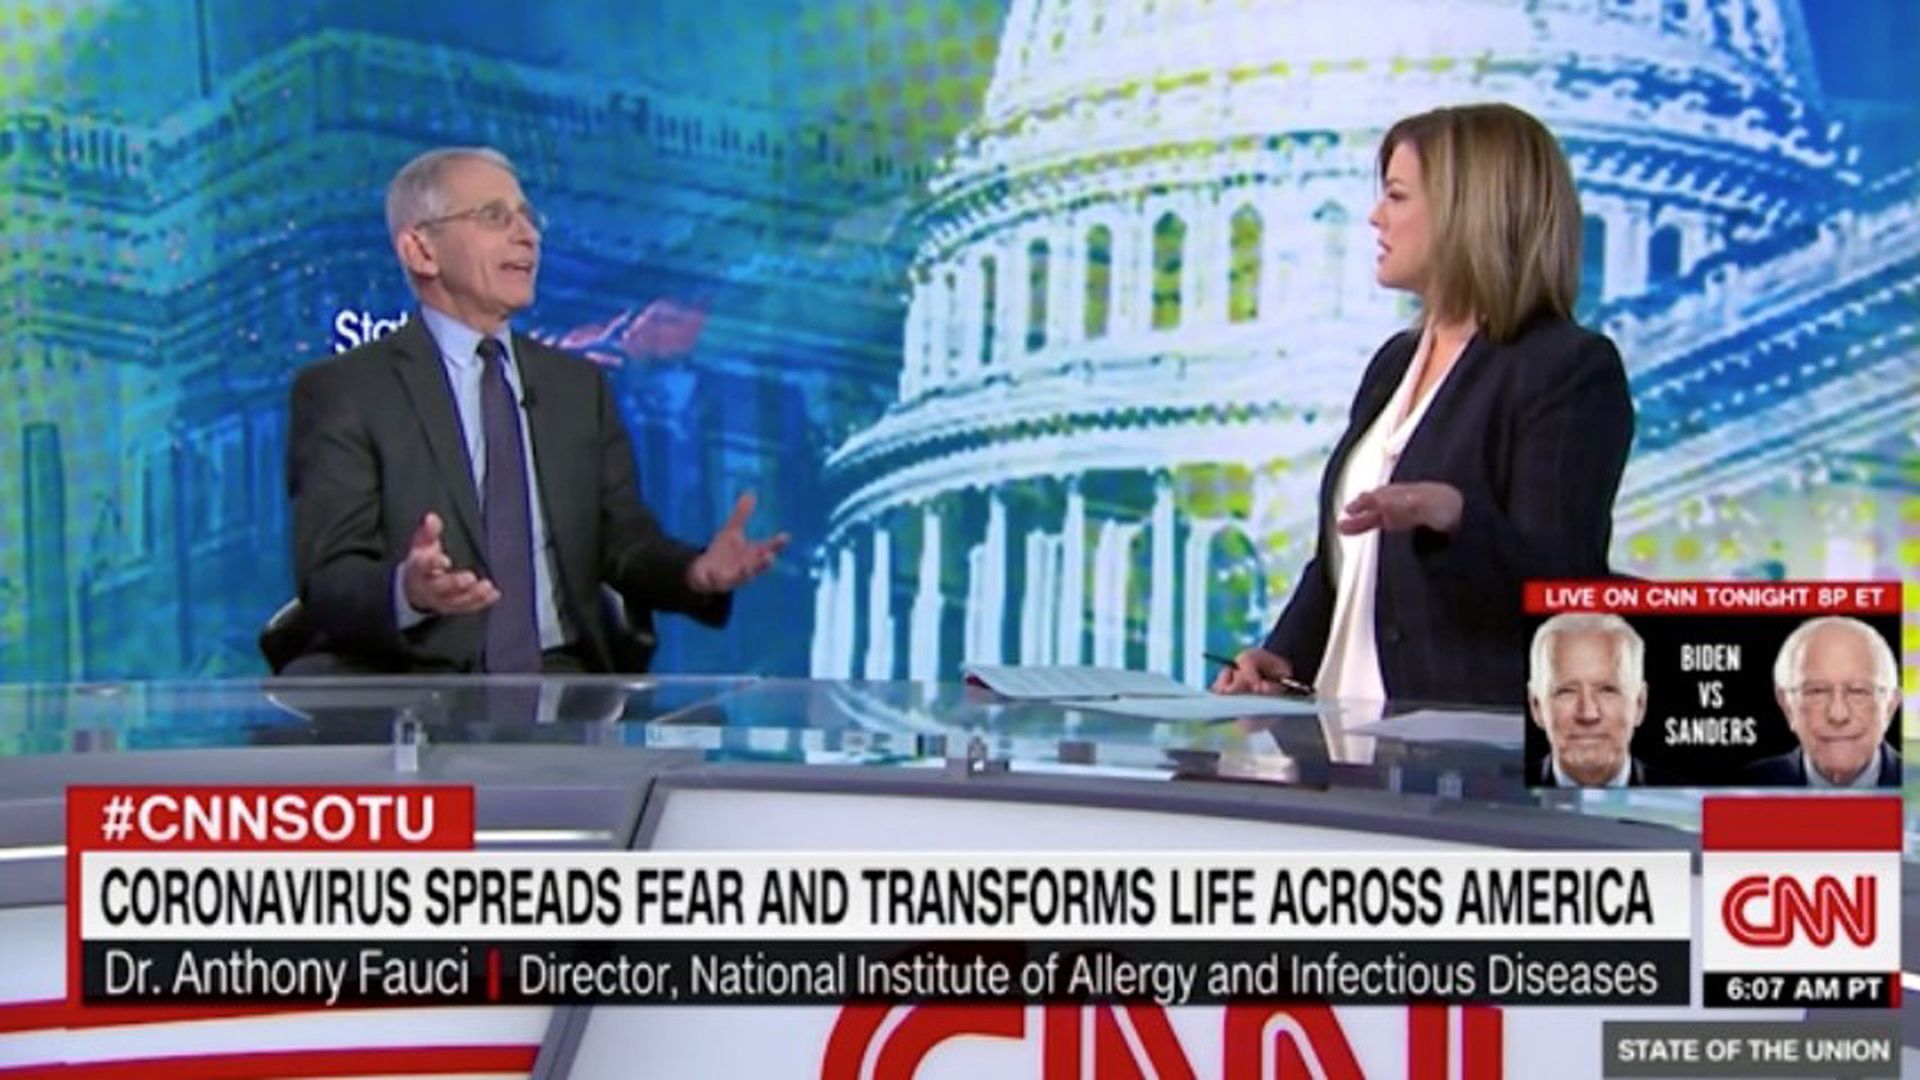 Dr. Fauci on CNN's "State of the Union"